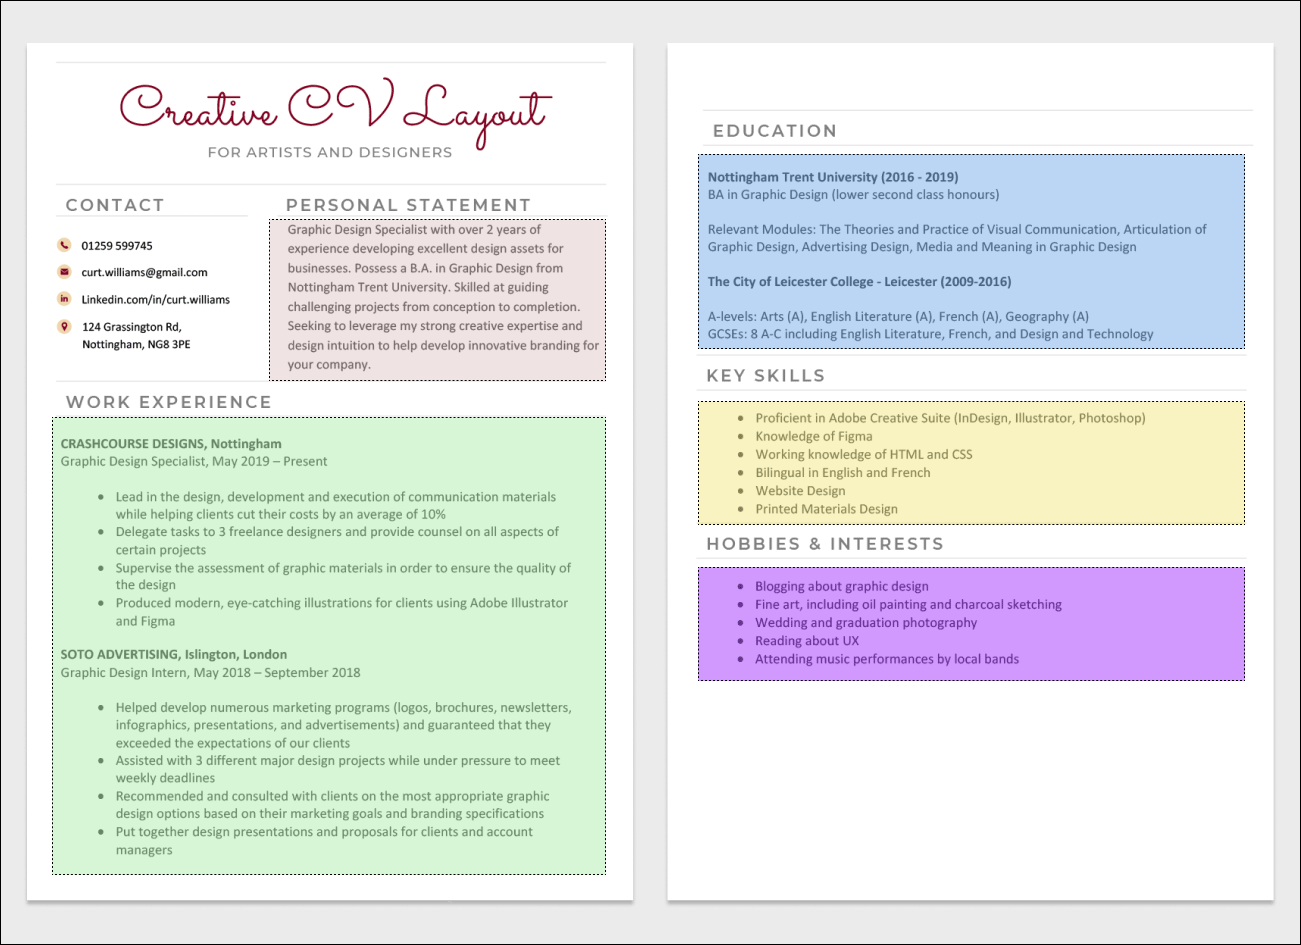 Two pages of a CV side-by-side on a light gray background to illustrate a creative CV layout